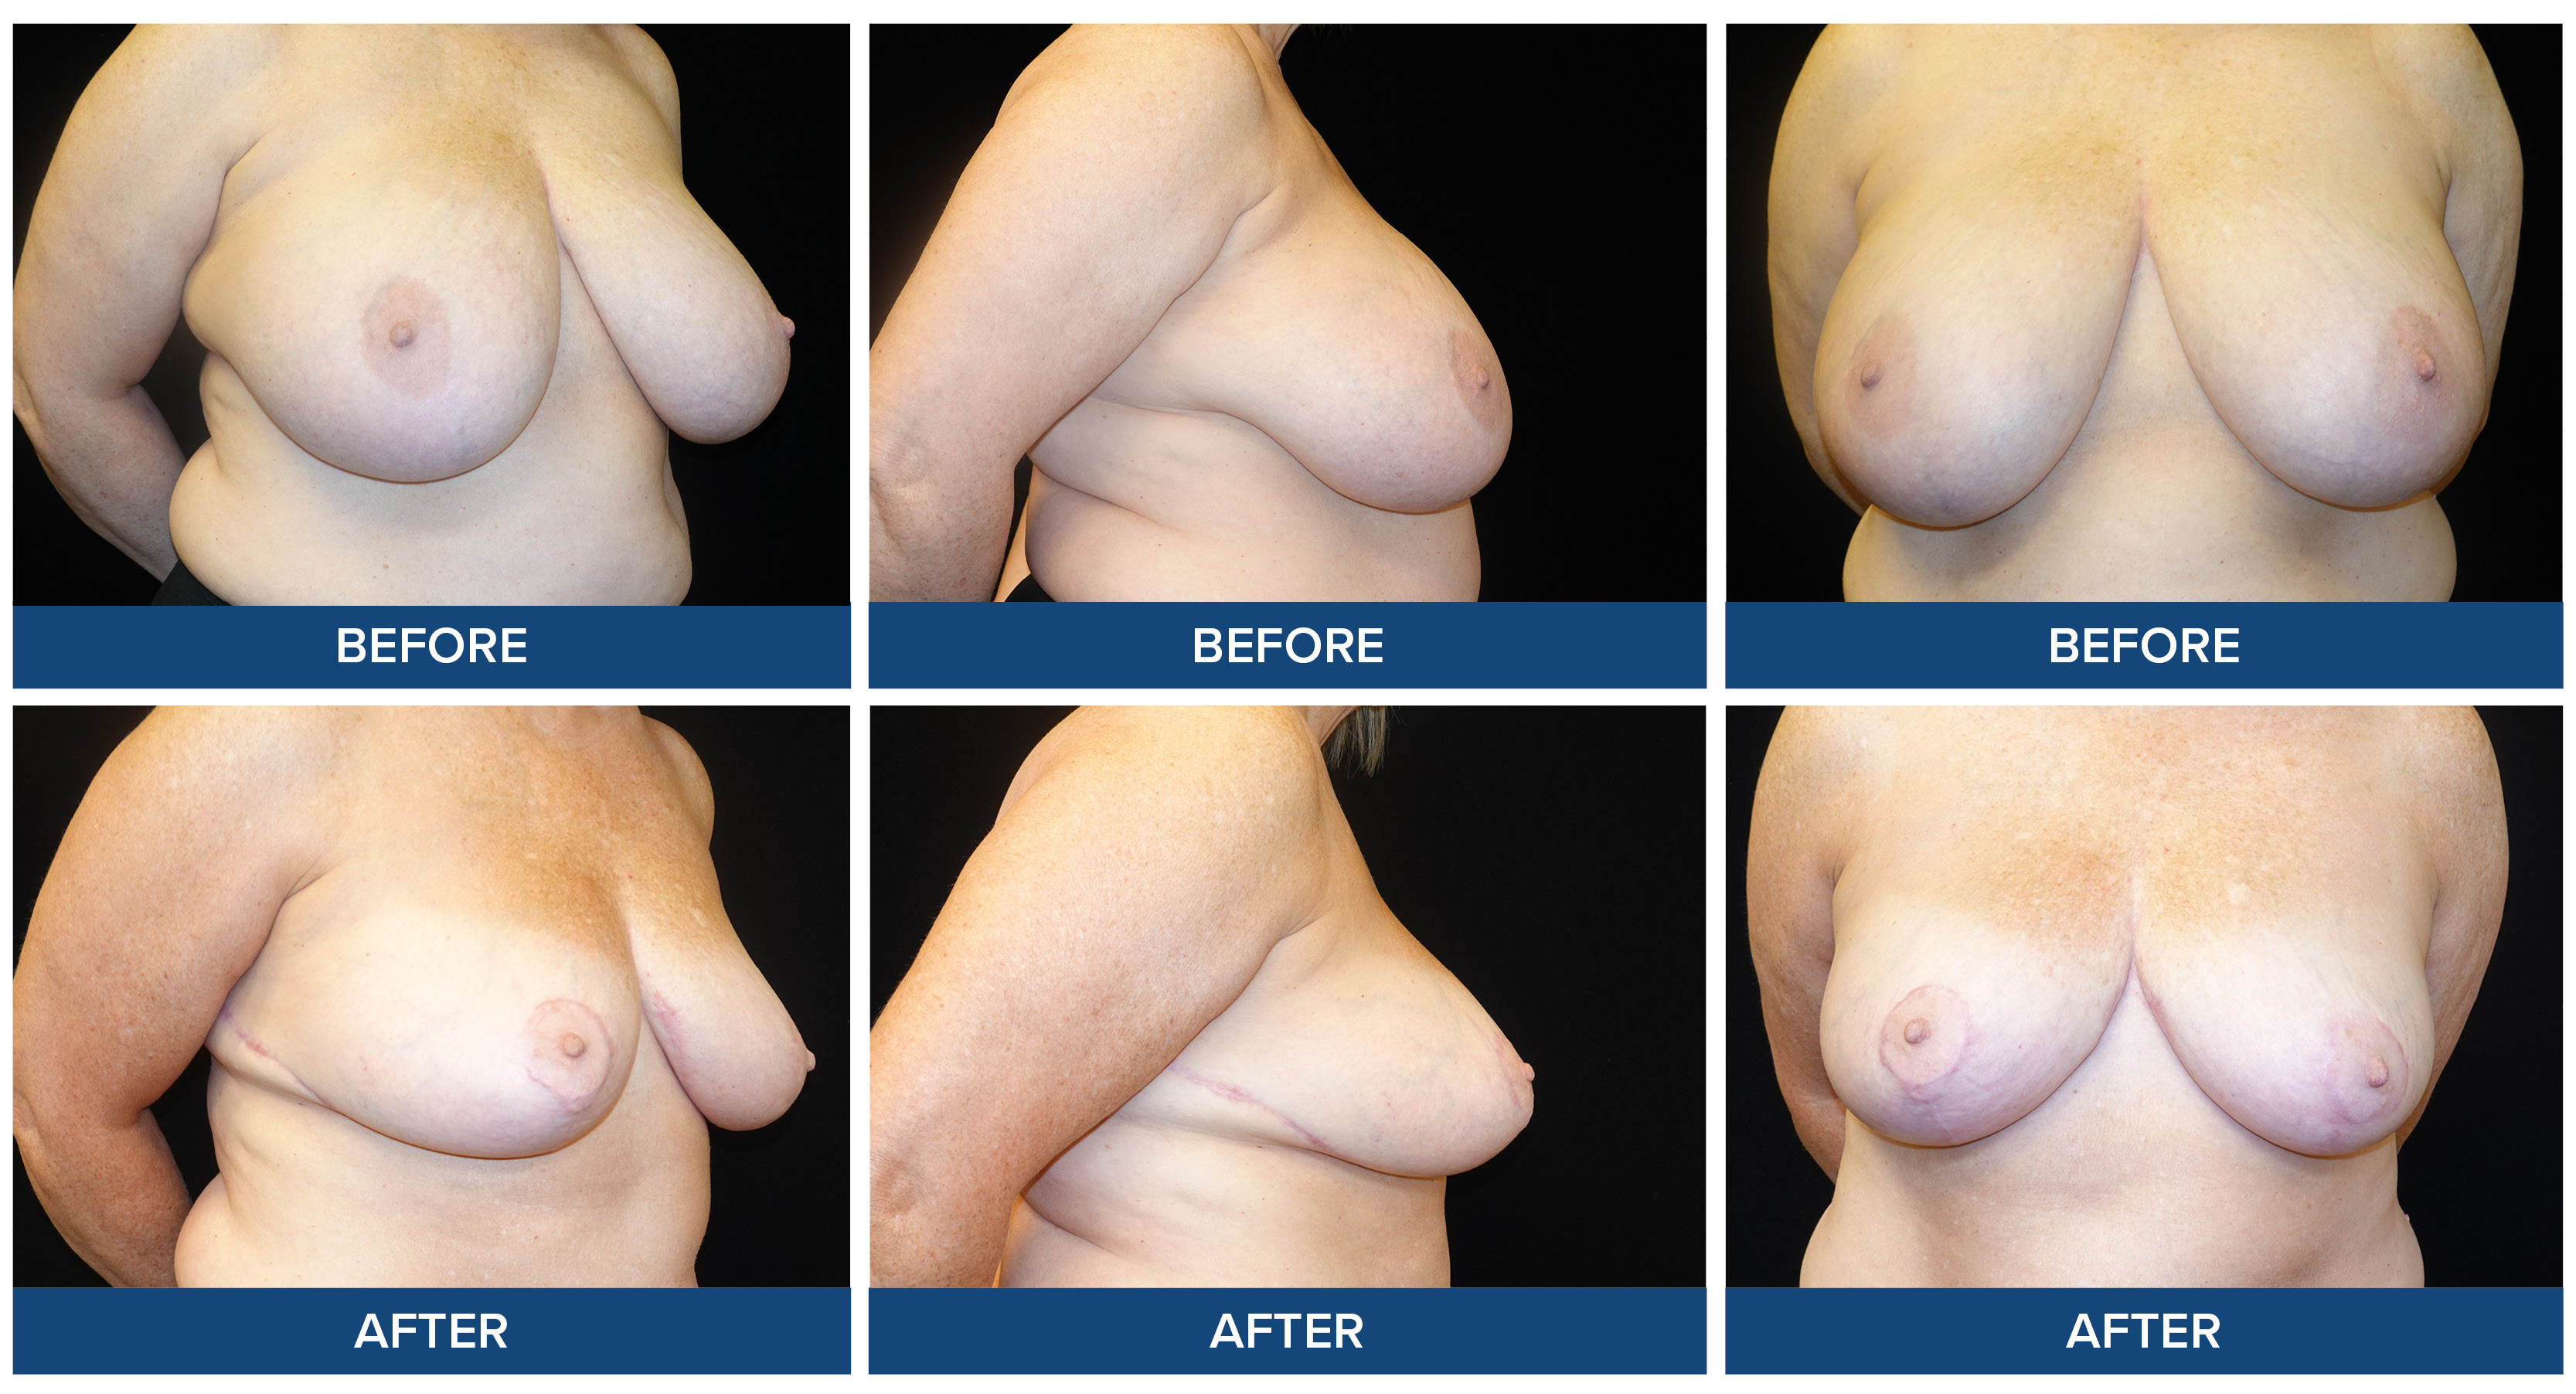 Before and after photos of a female patient bilateral breast reduction procedure.